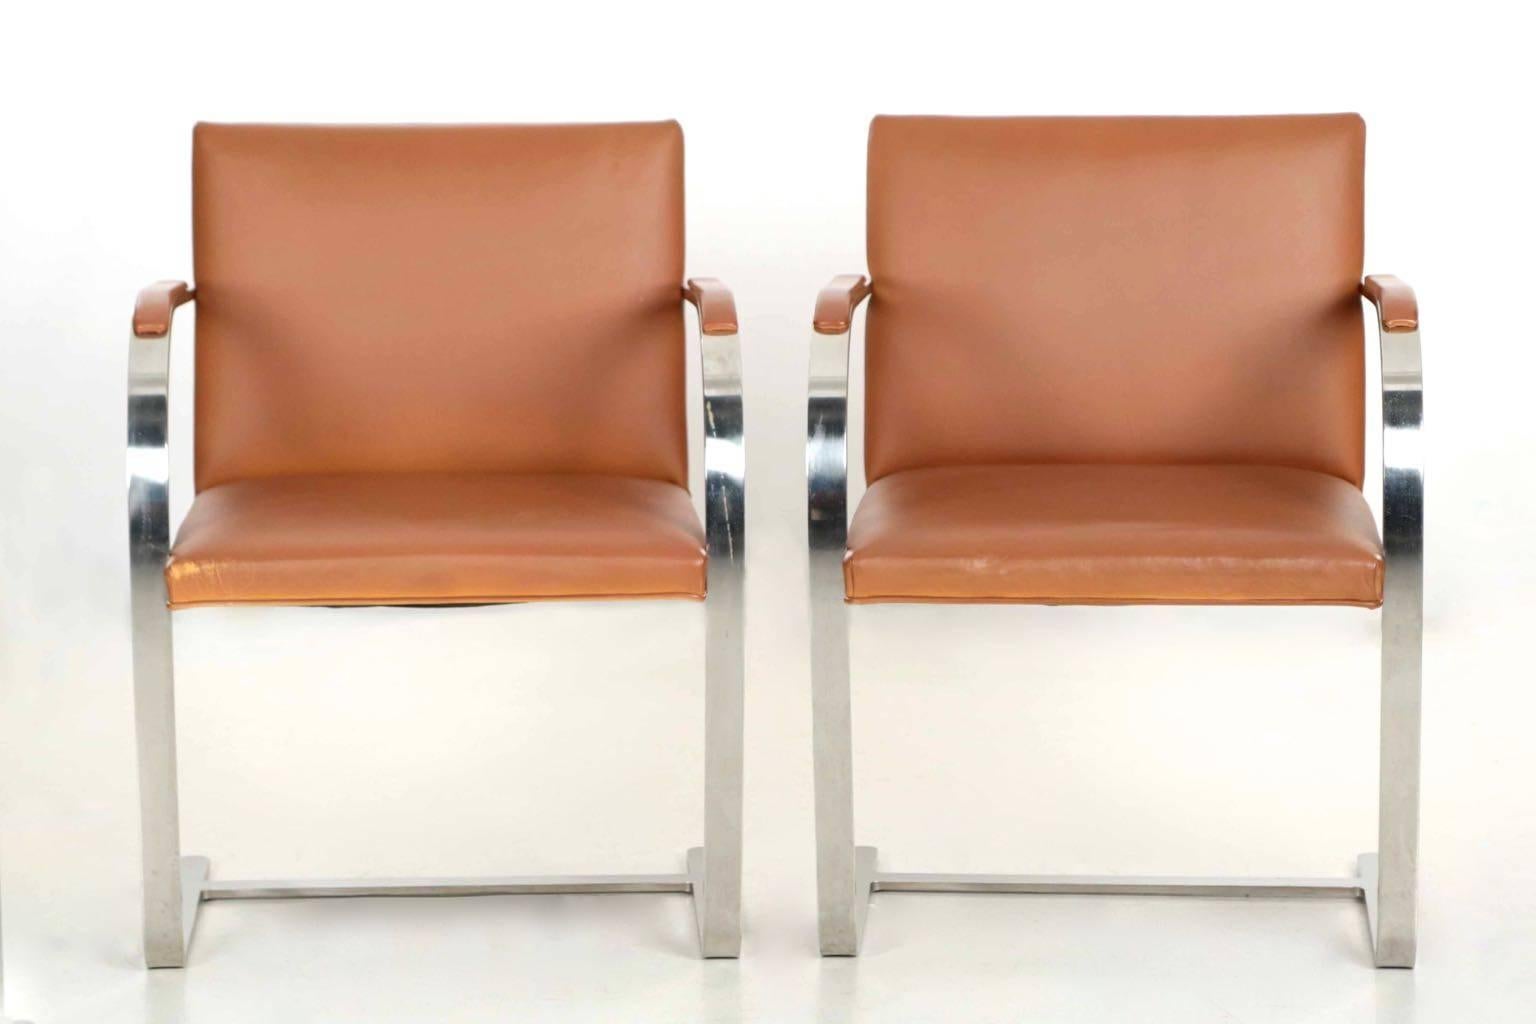 Typical of Knoll, the machining on this pair of chairs is exquisite with perfect welds and flawless finishing of the metal. The iconic Brno flat bar arm chair was designed by Ludwig Mies van der Rohe and the present pair were manufactured by Knoll